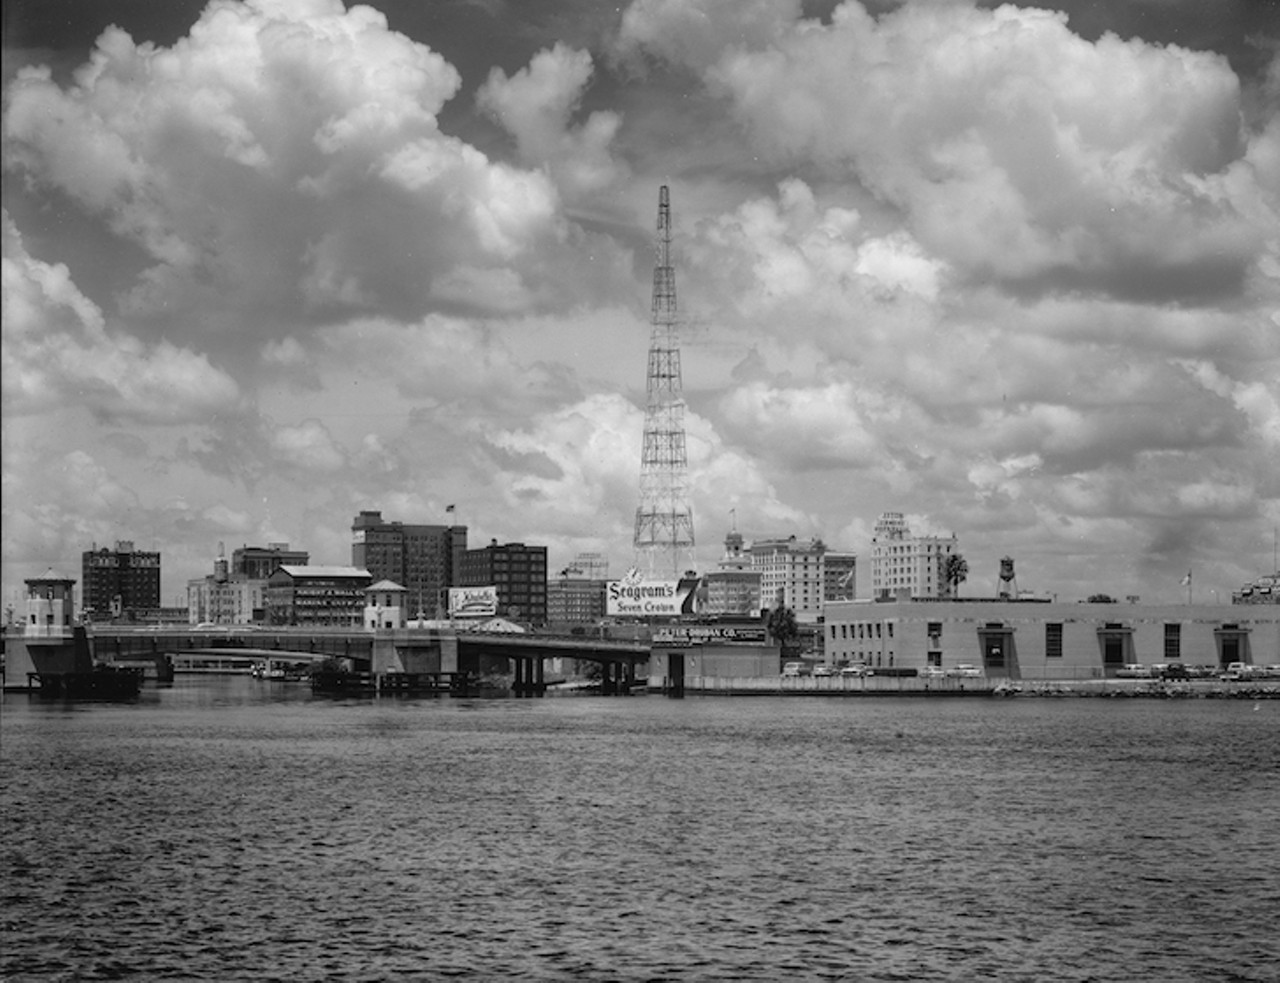 THEN
Downtown Tampa skyline and Platt Street Bridge 
View from Davis Islands, 1960.
Industrial buildings, warehouses, and port facilities once dominated the downtown Tampa waterfront. In the mid-1970s Mayor Bill Poe recognized the appeal of having public access to the waterways for residents and tourists and sought redevelopment. It took 35 years and over $35 million, but the Tampa Riverwalk that now fronts 2.6 miles along down the Hillsborough River from Water Works Park (opened in 2014) to the Channelside District, is now open.